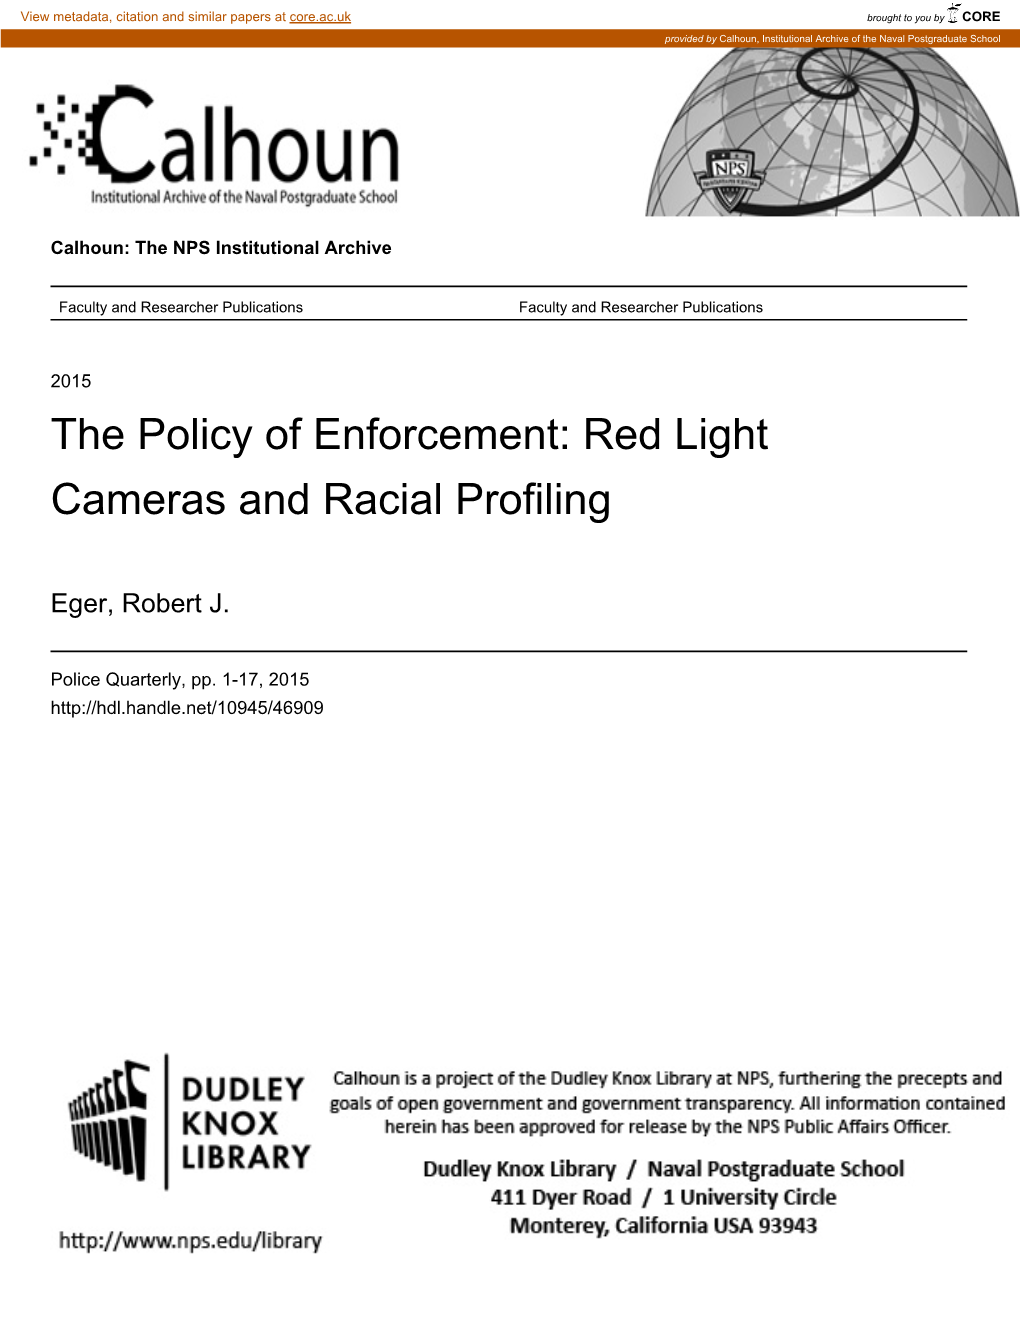 The Policy of Enforcement: Red Light Cameras and Racial Profiling